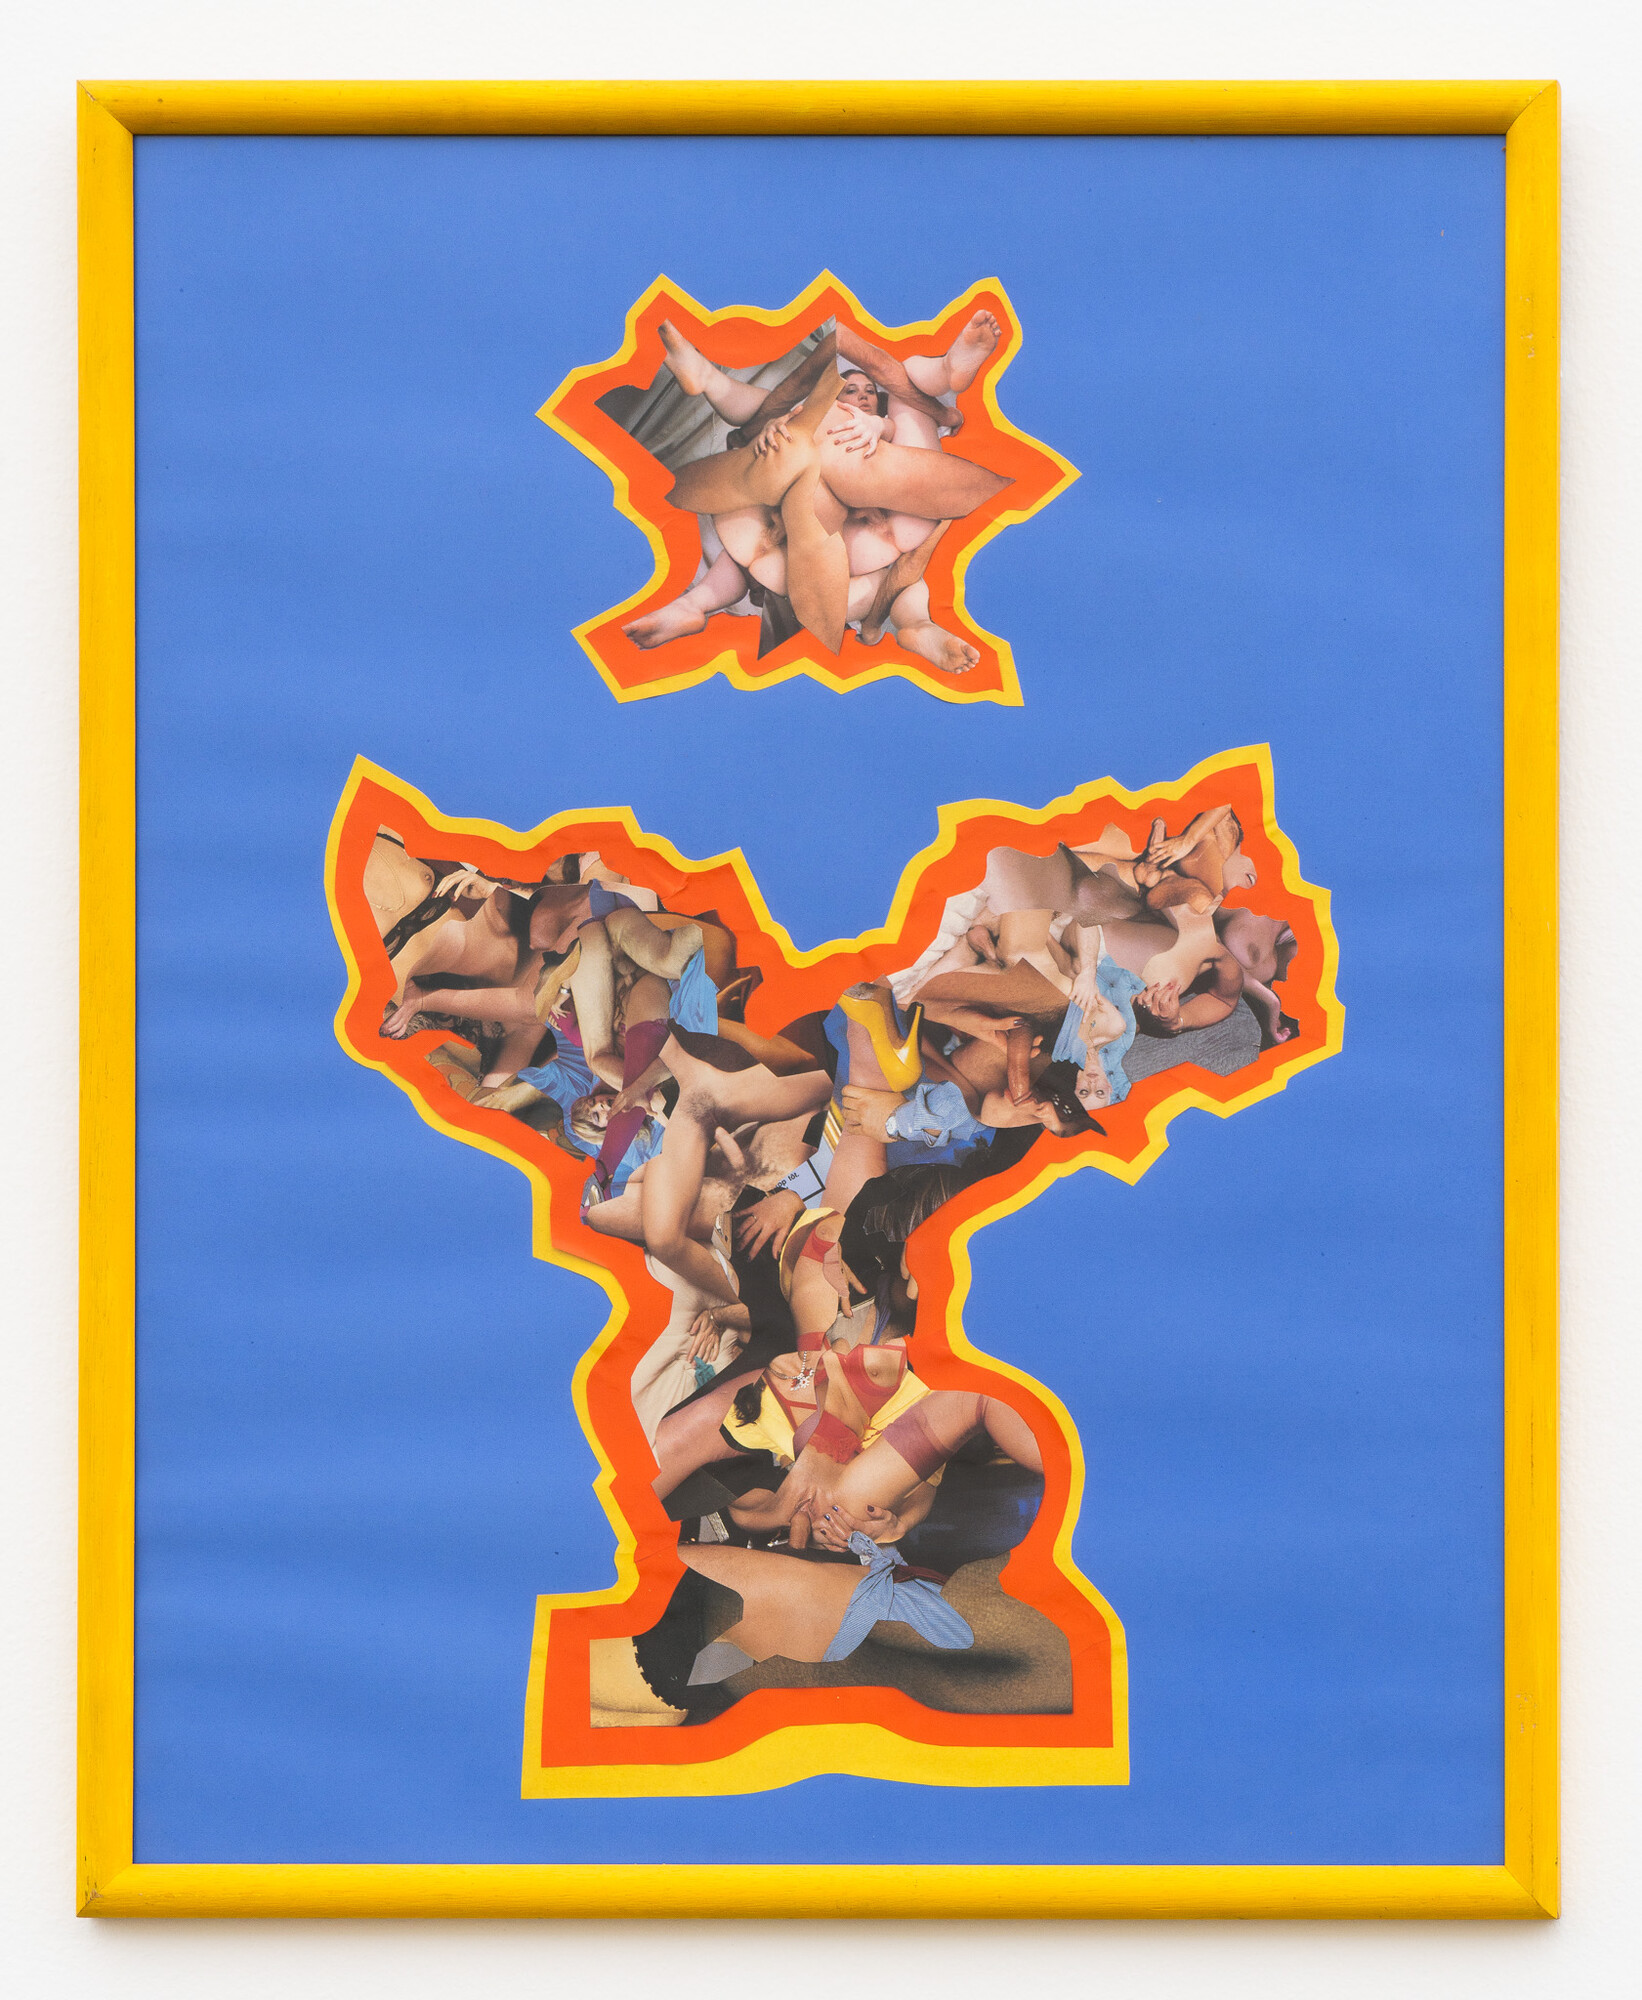 Mike Brown, <em>Golden Chalice</em>, 1987/88, paper collage, 68.0 x 54.0 cm. Courtesy of the artist and Neon Parc.